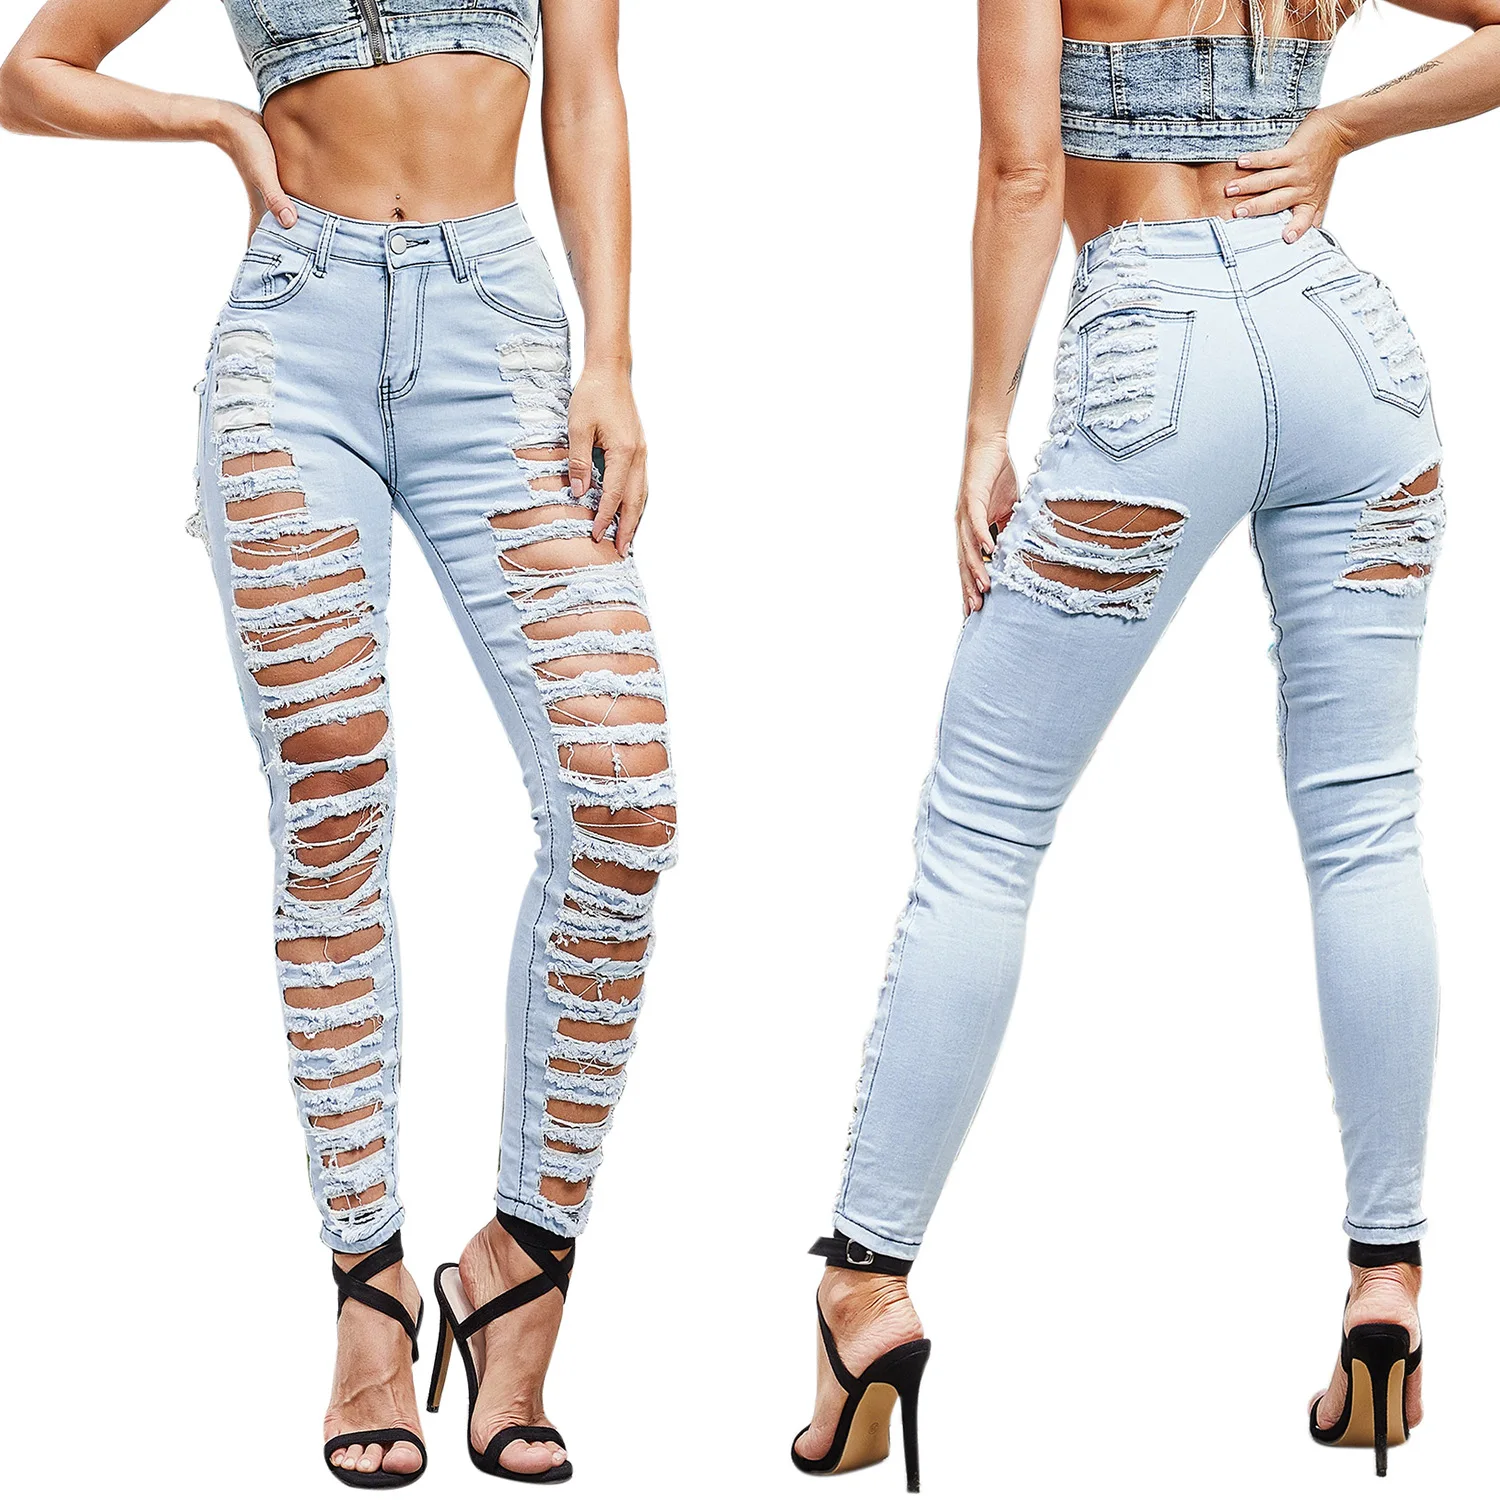 

Hot Fashion Selling Hot Selling Jeans High Waist Solid Color Sexy Slim-Fit Speaker Pants Women Jeans Women